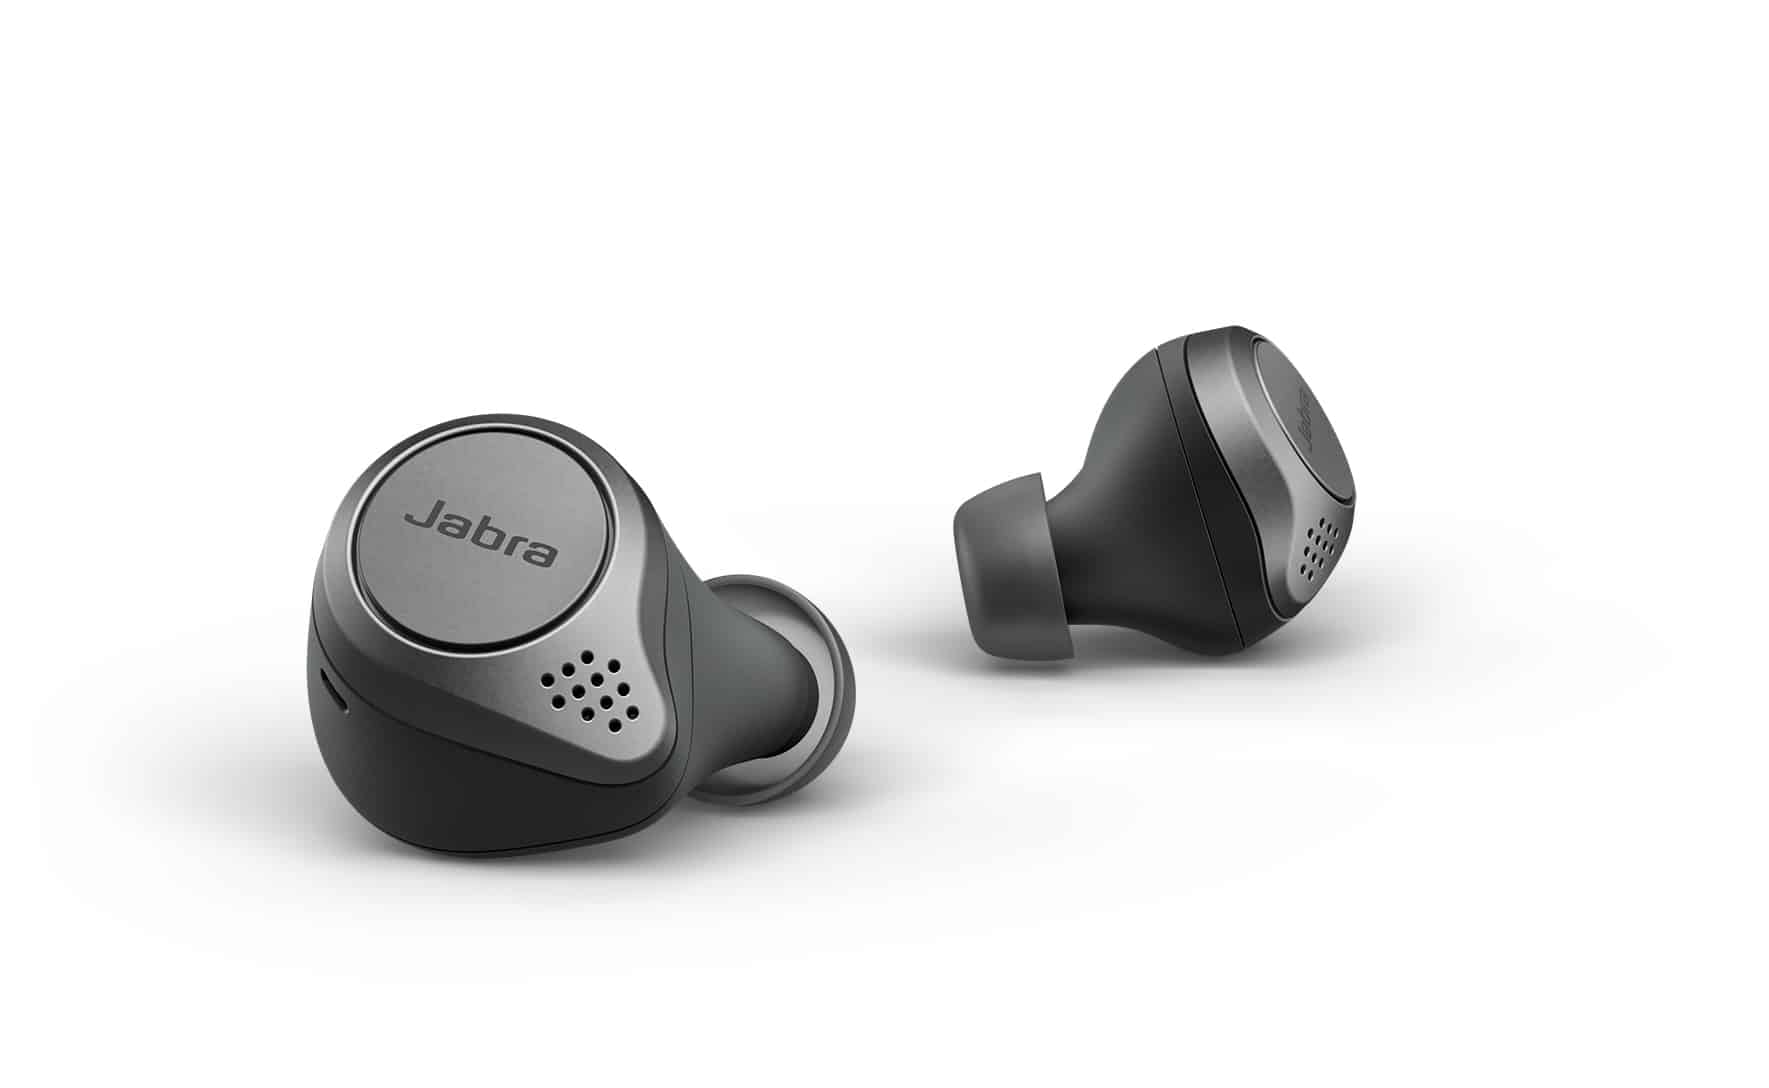 Jabra debuts the Elite 85t with Advanced Active Noise Cancellation